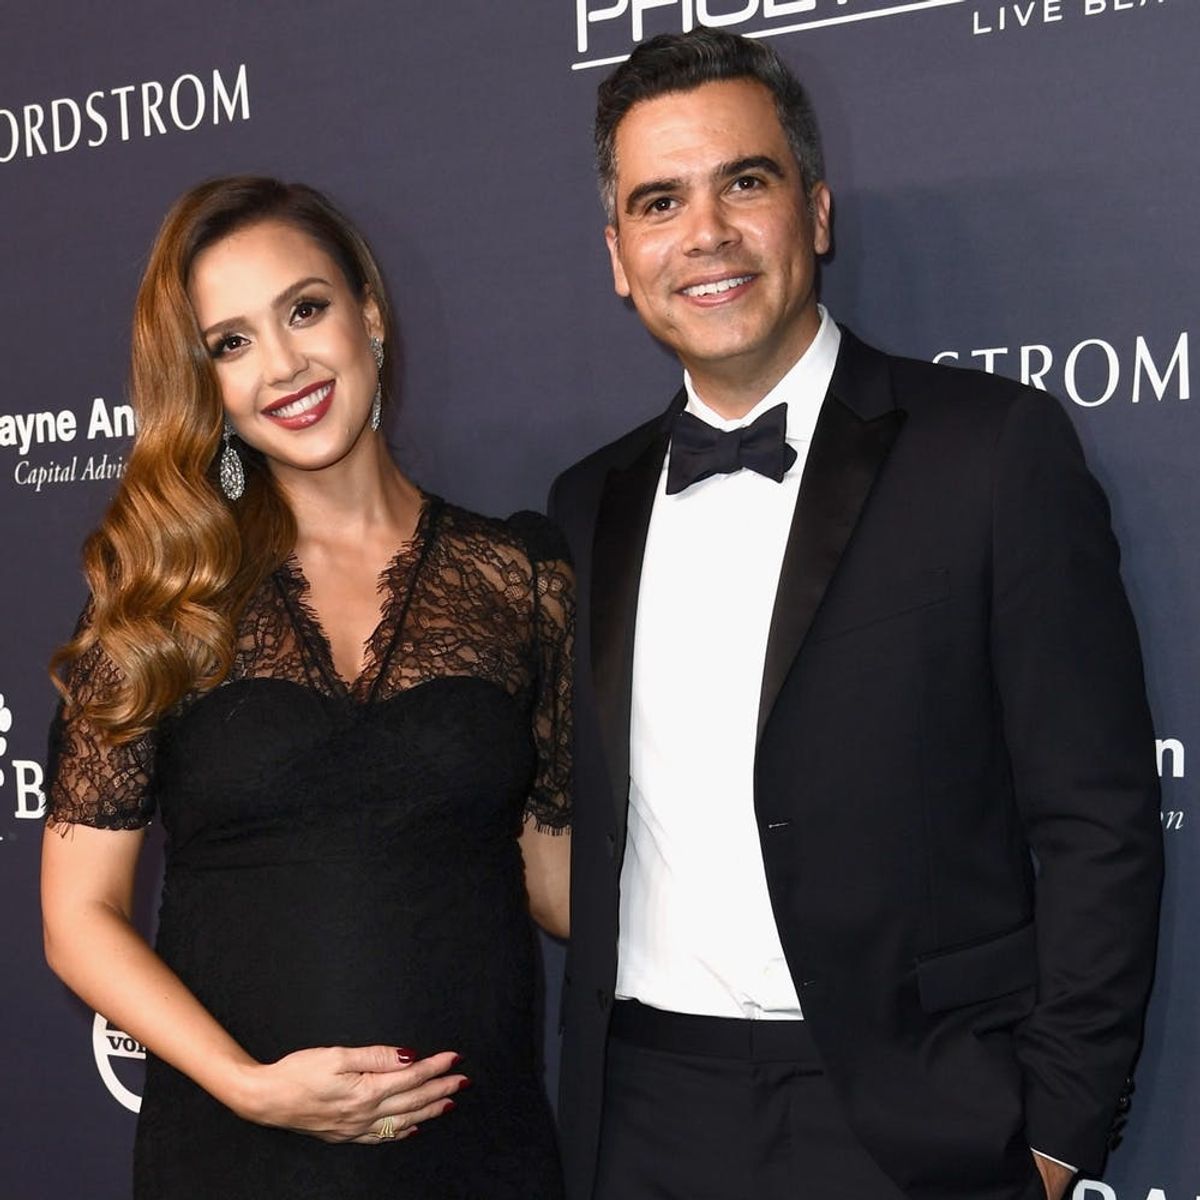 Jessica Alba Just Welcomed a New Year’s Eve Baby — See the Cute Pic!